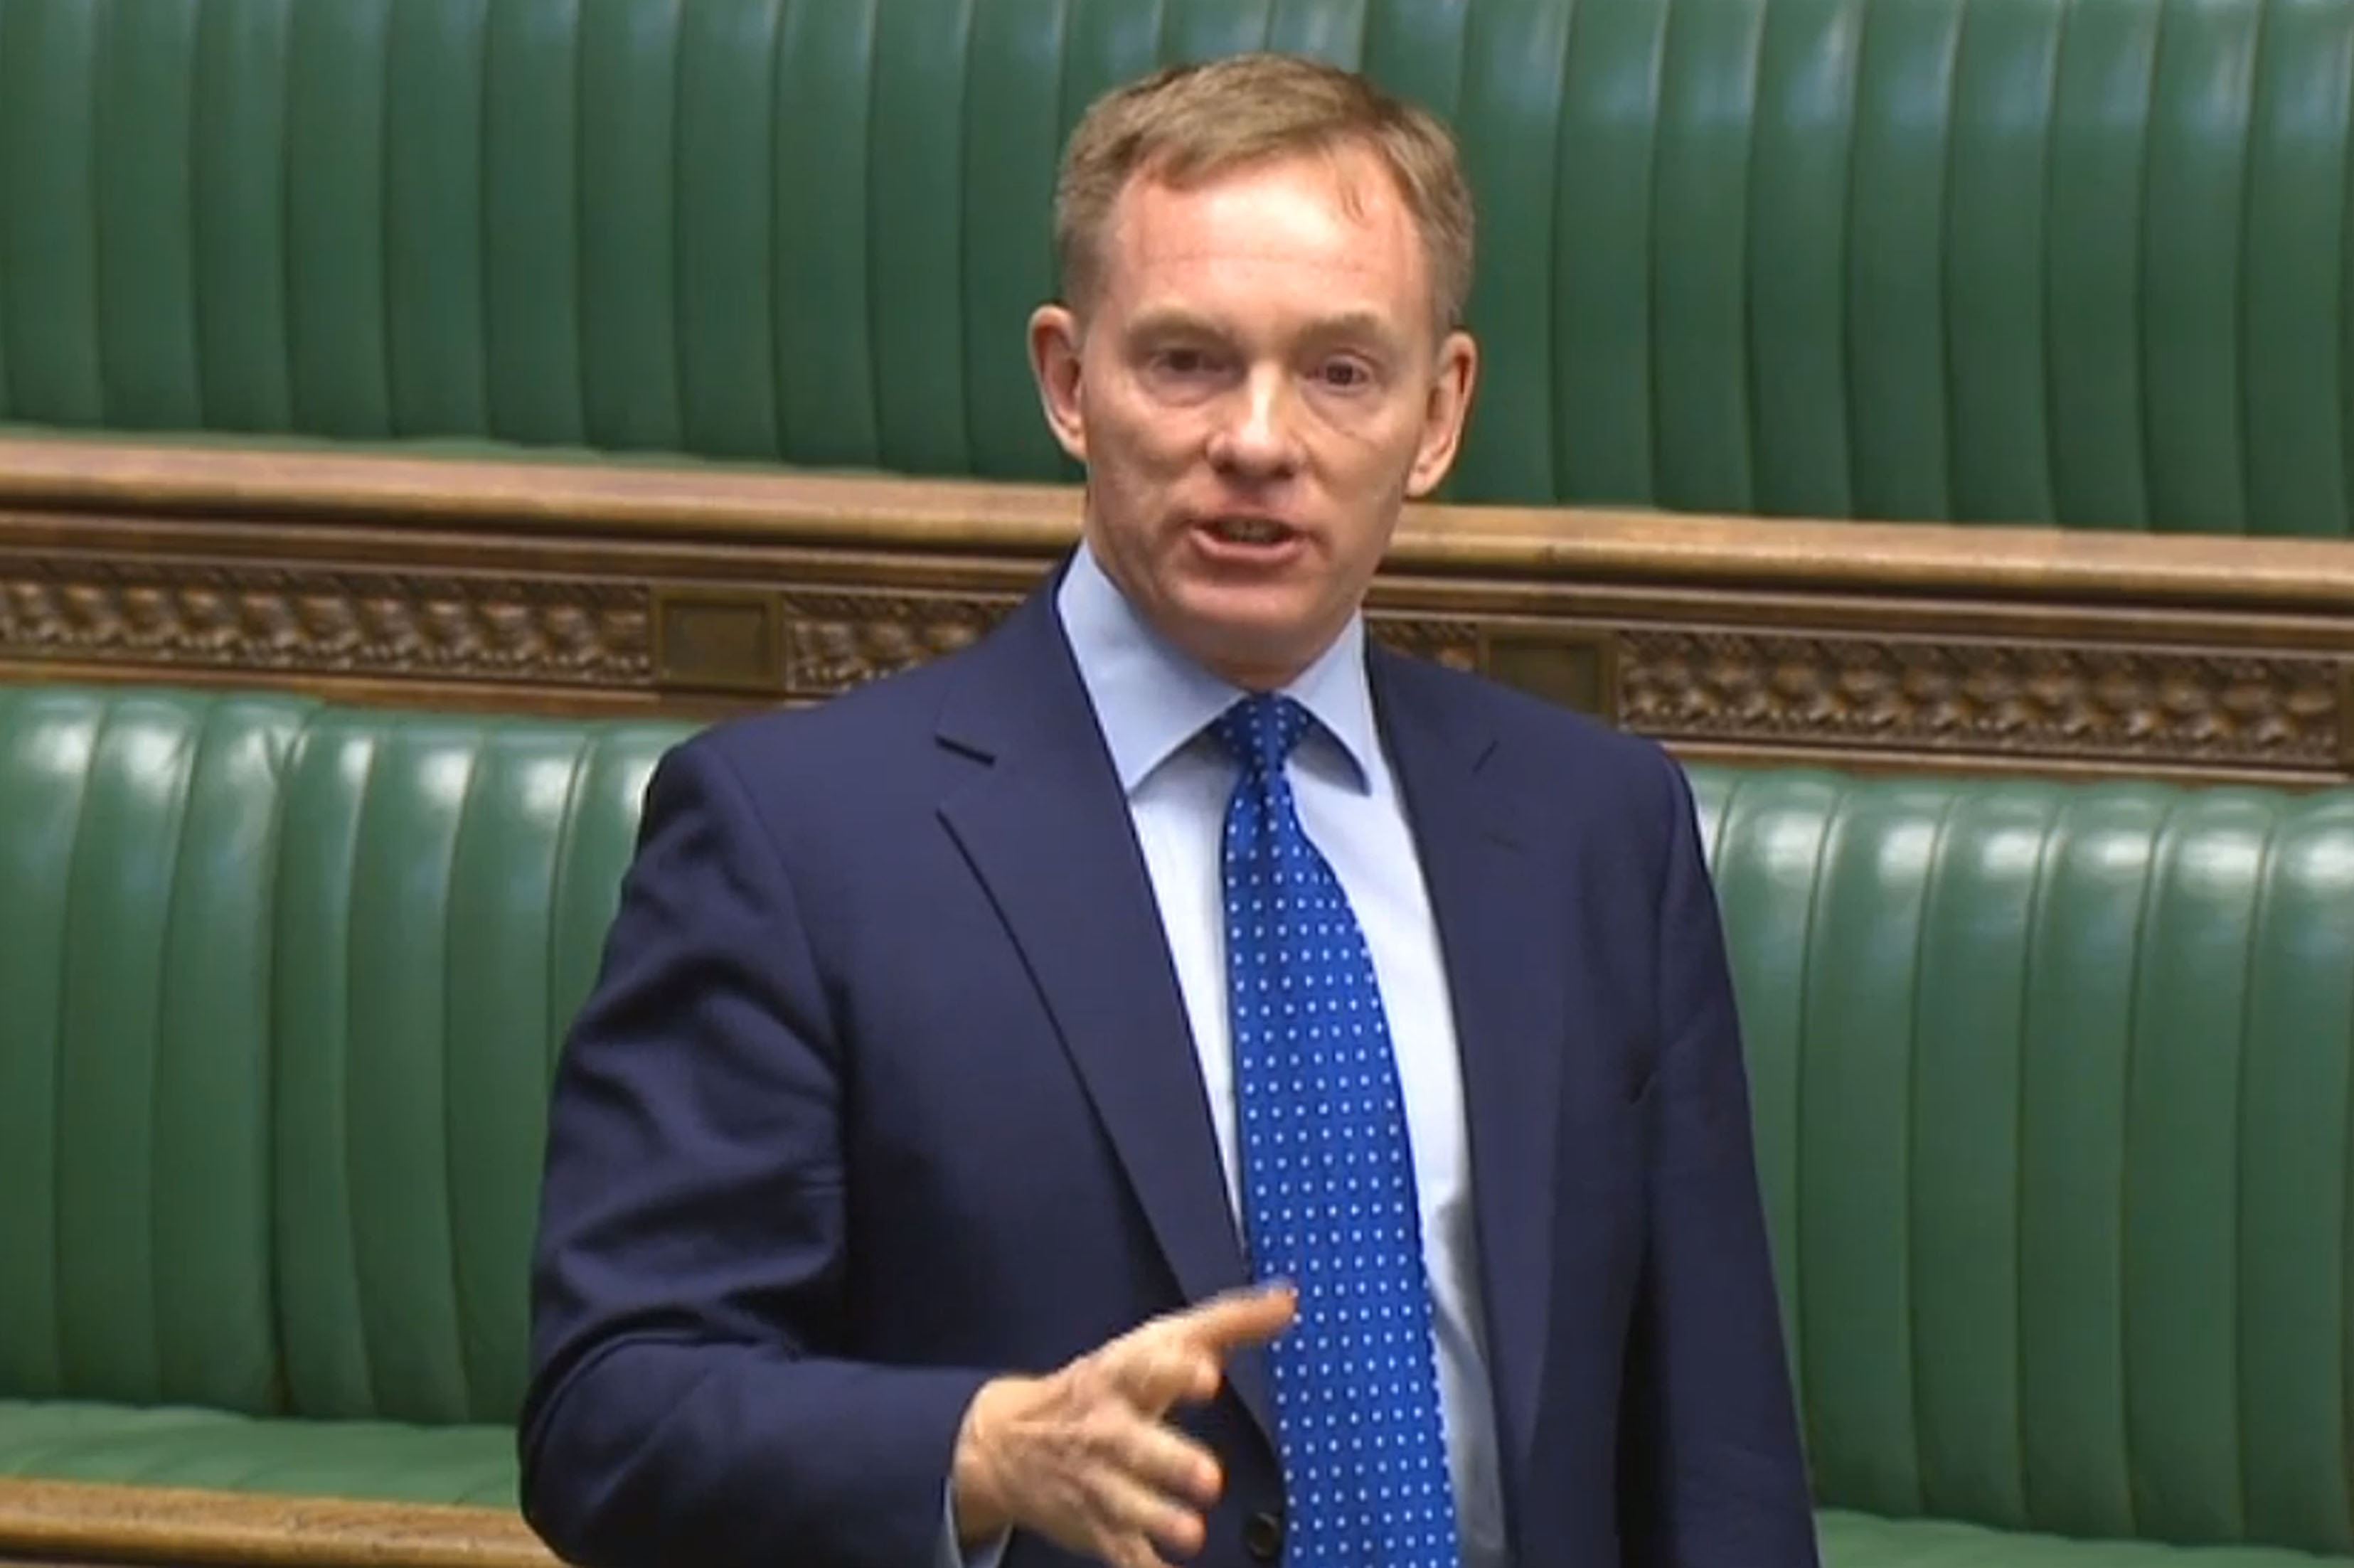 Labour MP Chris Bryant took an innovative approach to his private members' bill